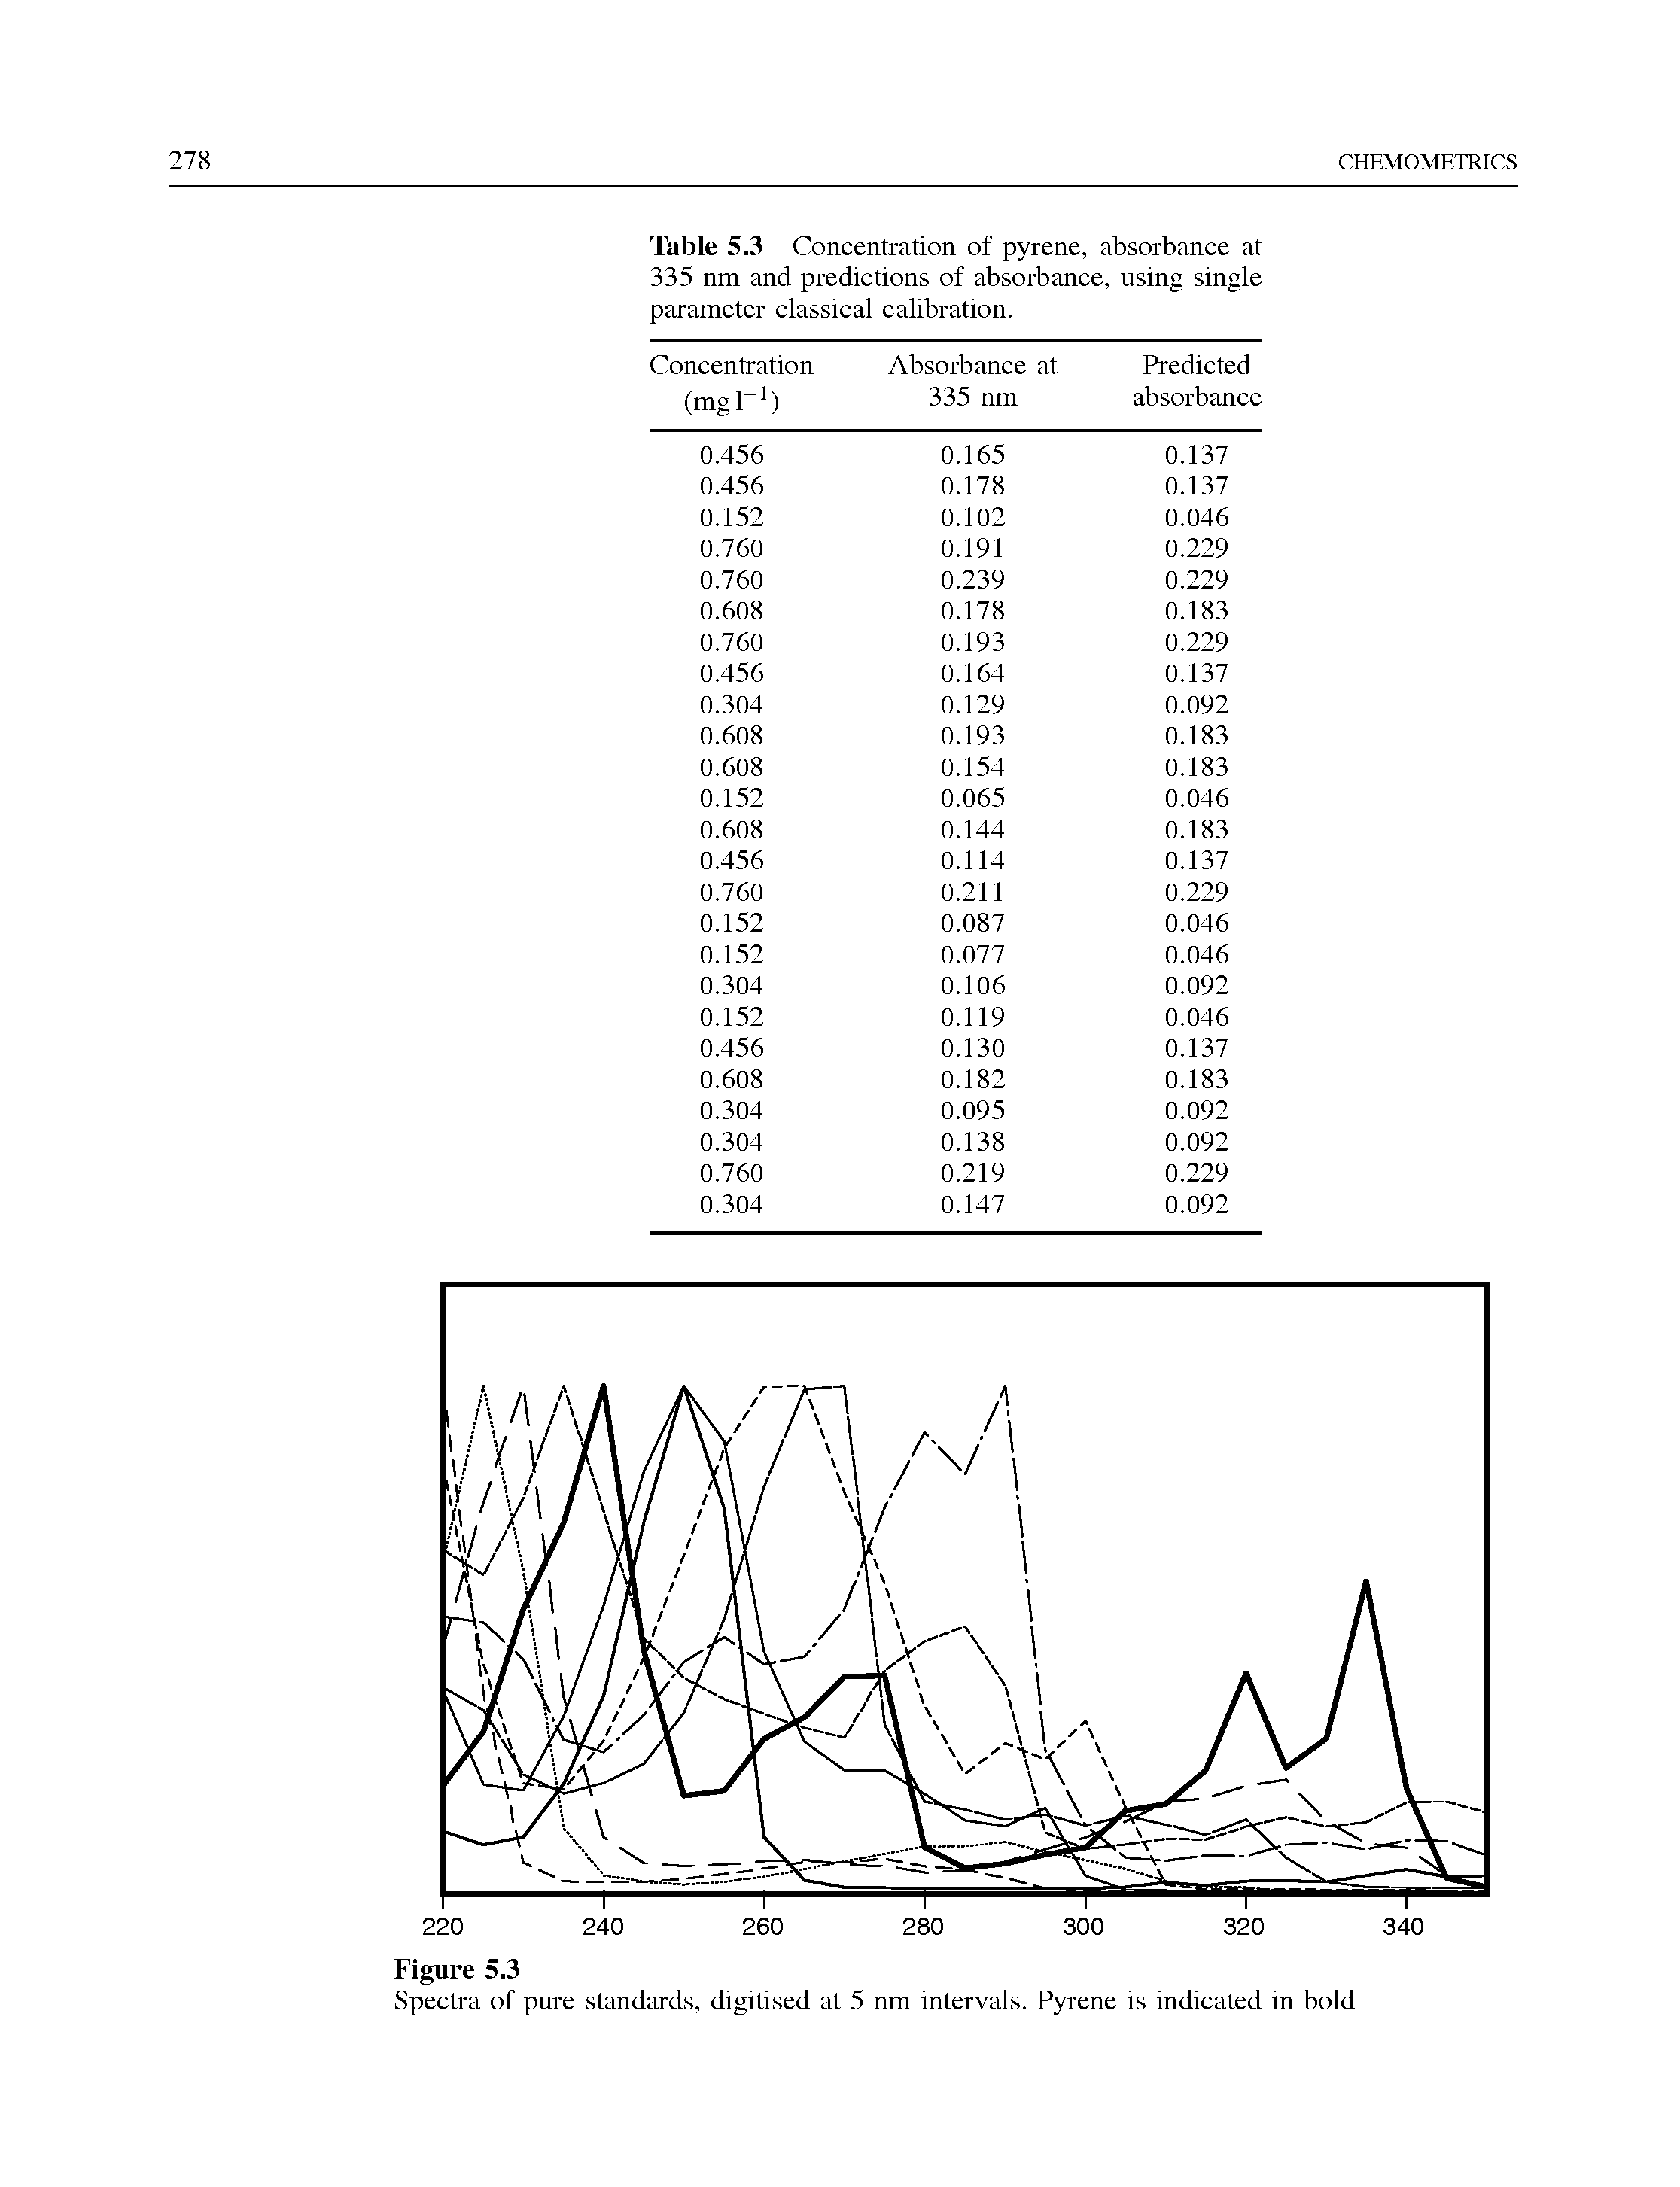 Table 5.3 Concentration of pyrene, absorbance at 335 nm and predictions of absorbance, using single parameter classical calibration.